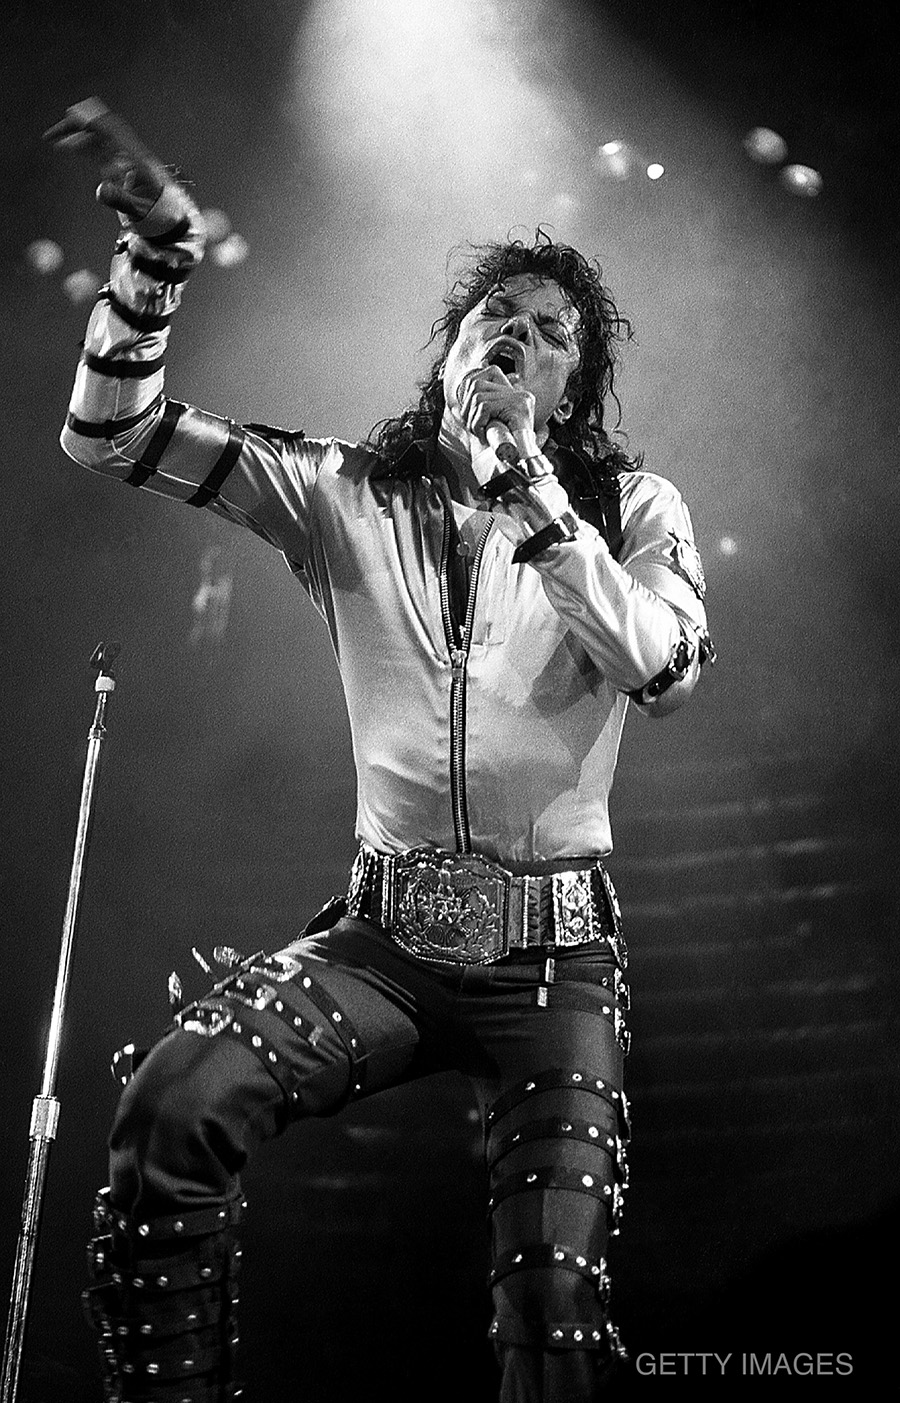 Michael Jackson performs during his Bad World Tour in 1988.